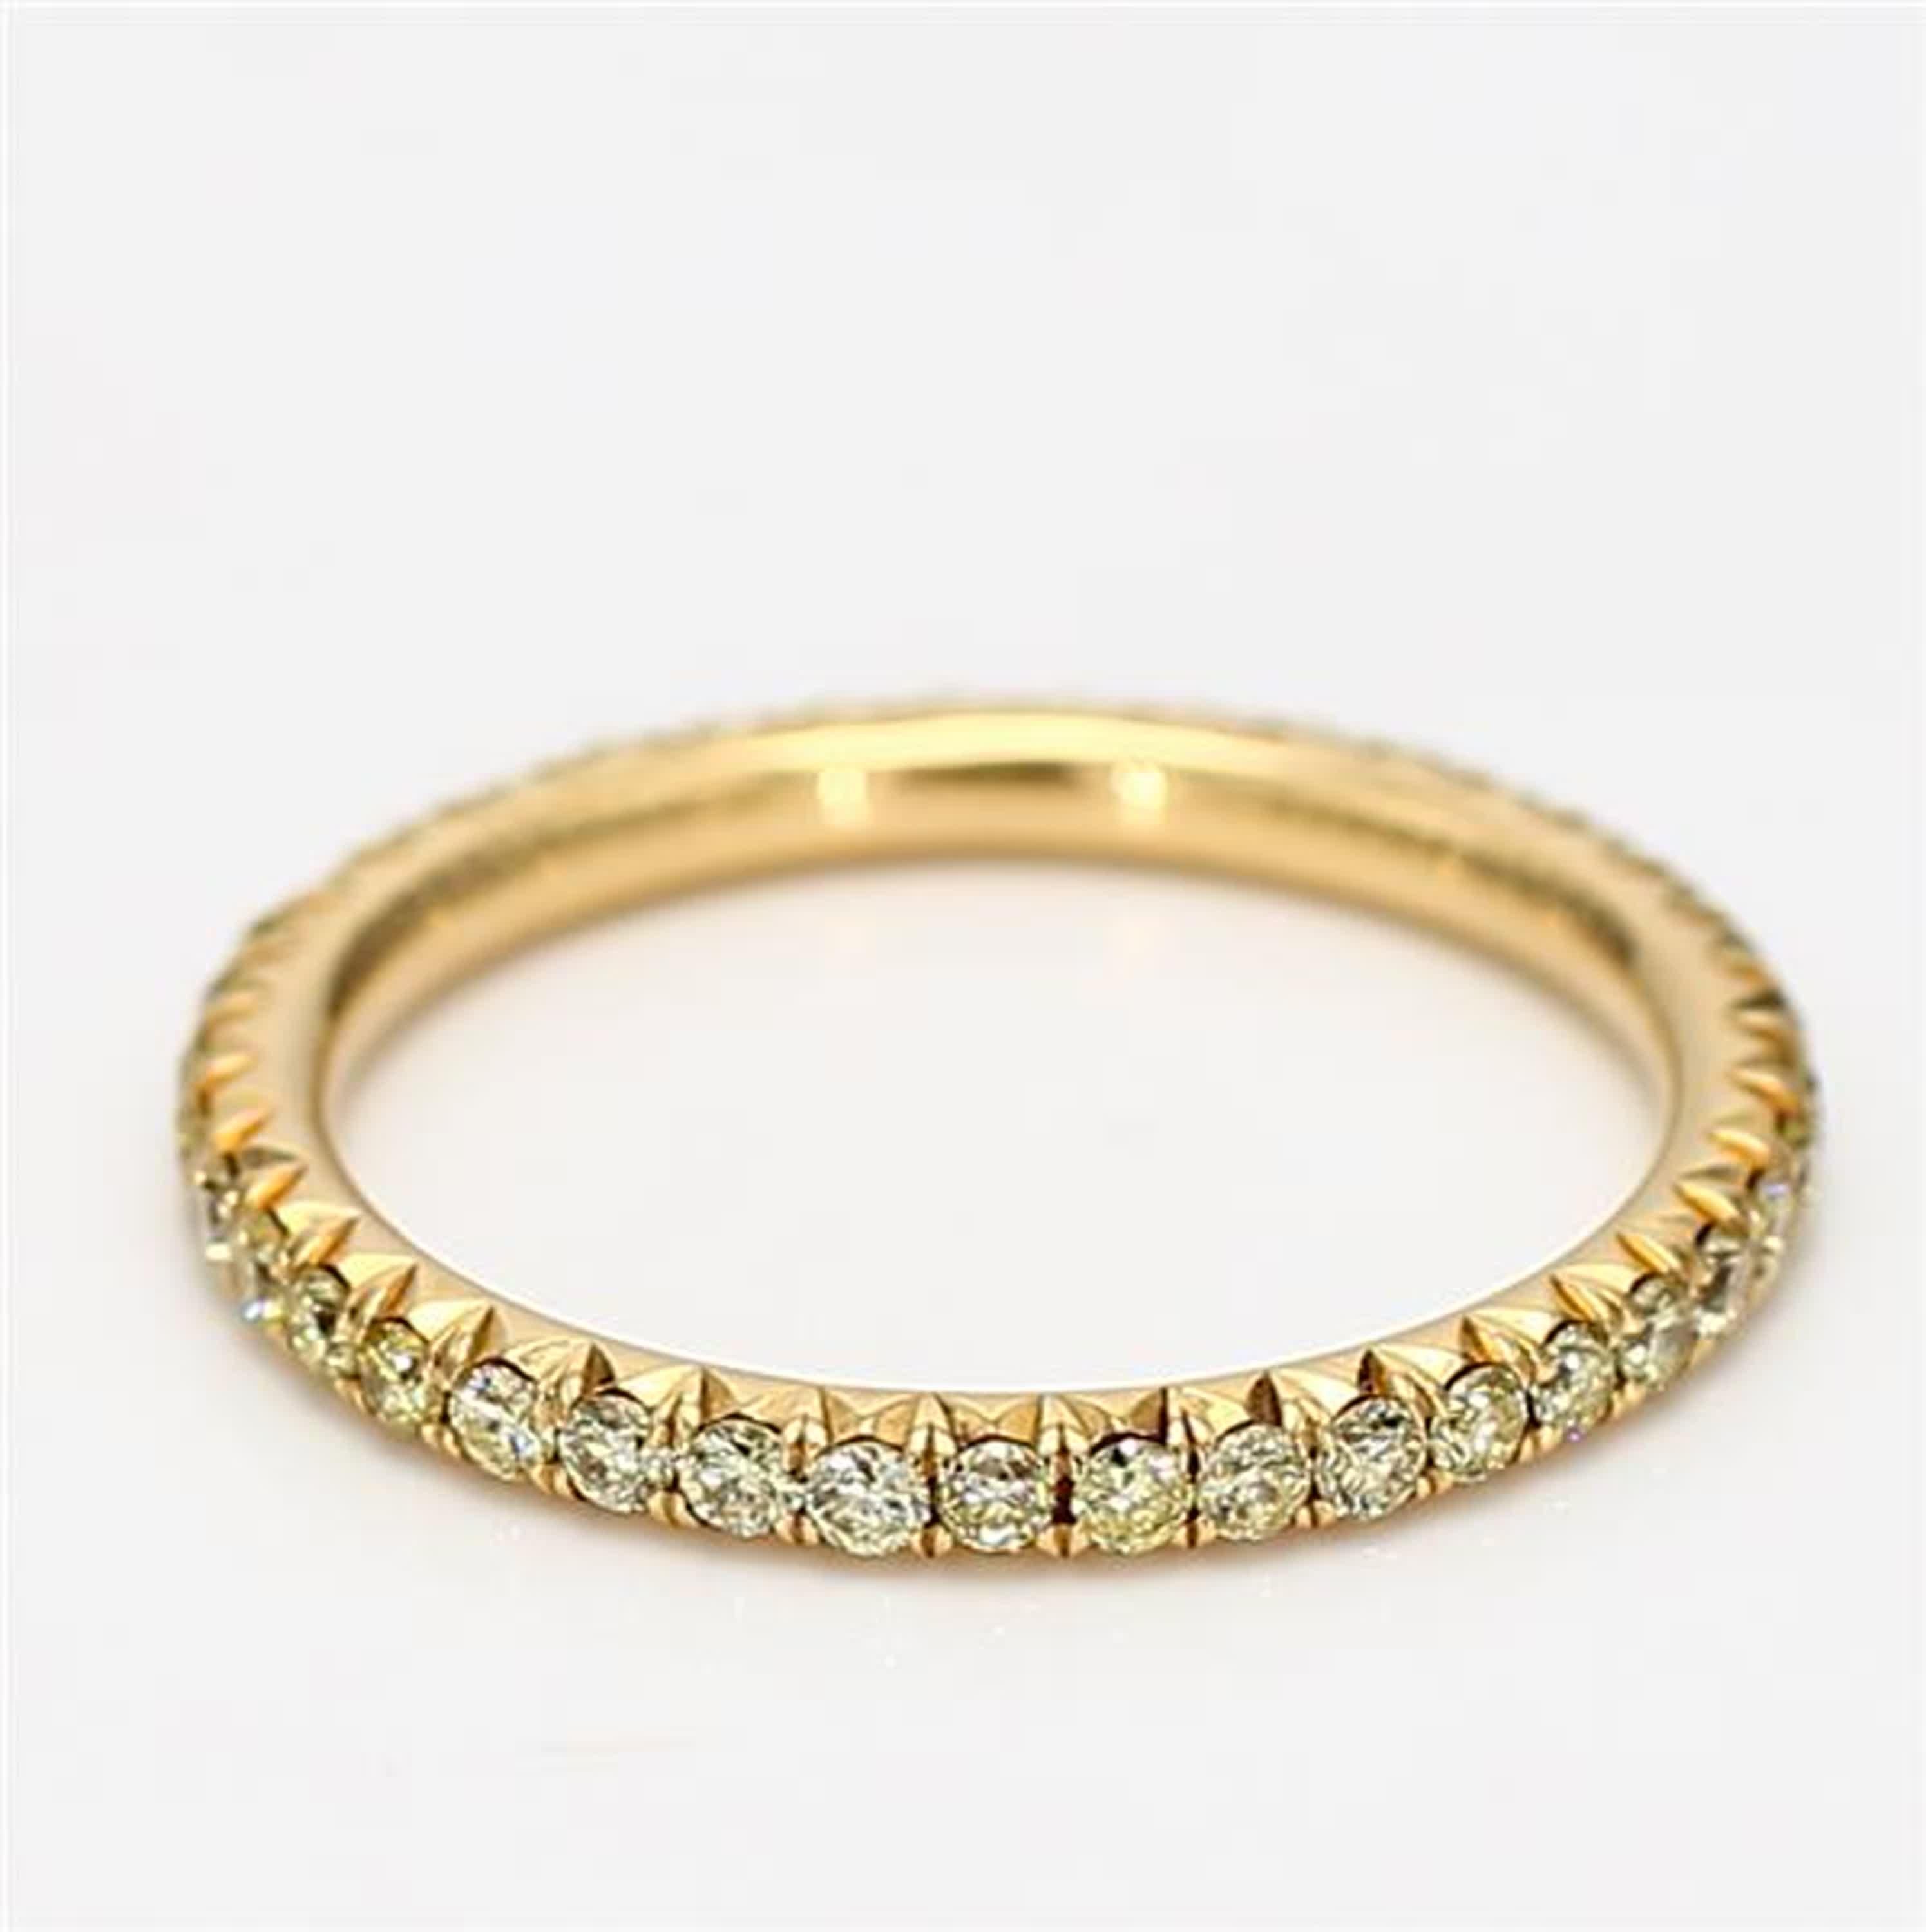 RareGemWorld's classic diamond band. Mounted in a beautiful 18K Yellow Gold setting with natural round yellow diamond melee. This band is guaranteed to impress and enhance your personal collection!

Total Weight: .57cts

Shank Width x Shank Height: